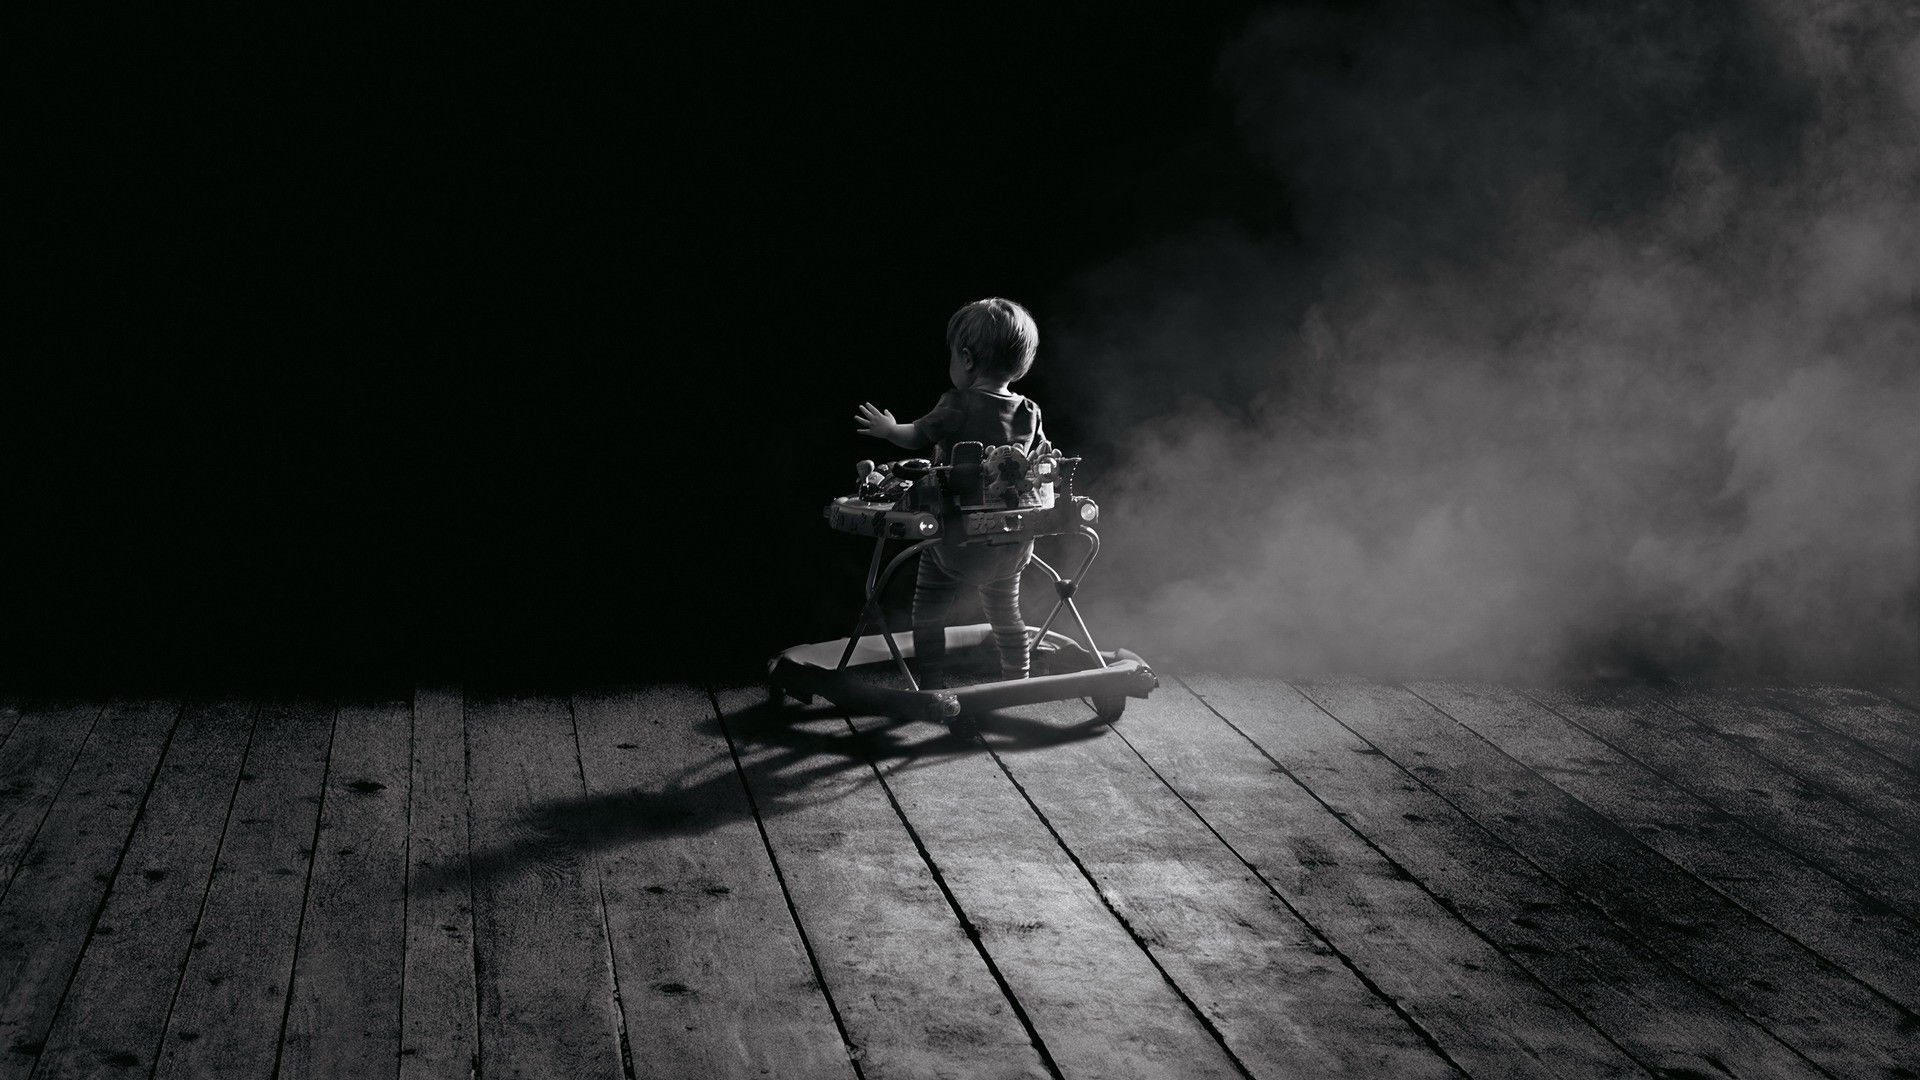 A small child in a walker in a dark room with smoke - Horror